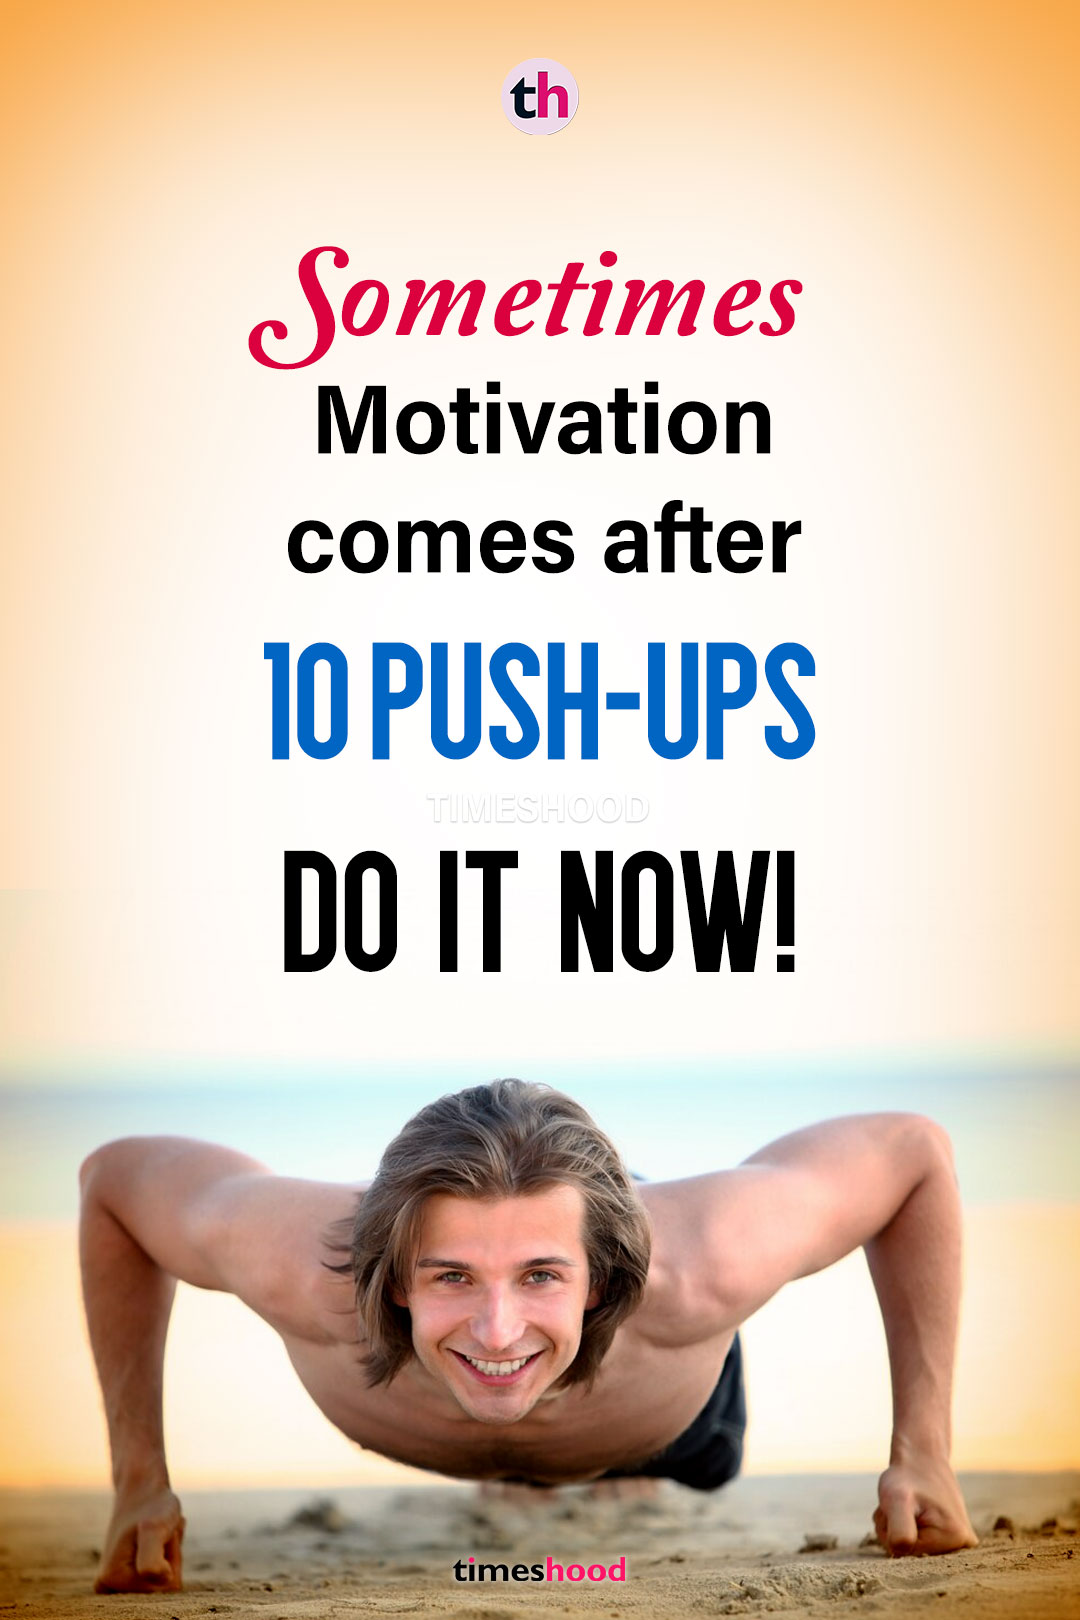 Sometimes Motivation comes after 10 push-ups, Do it NOW! - Kick start morning workout quotes.